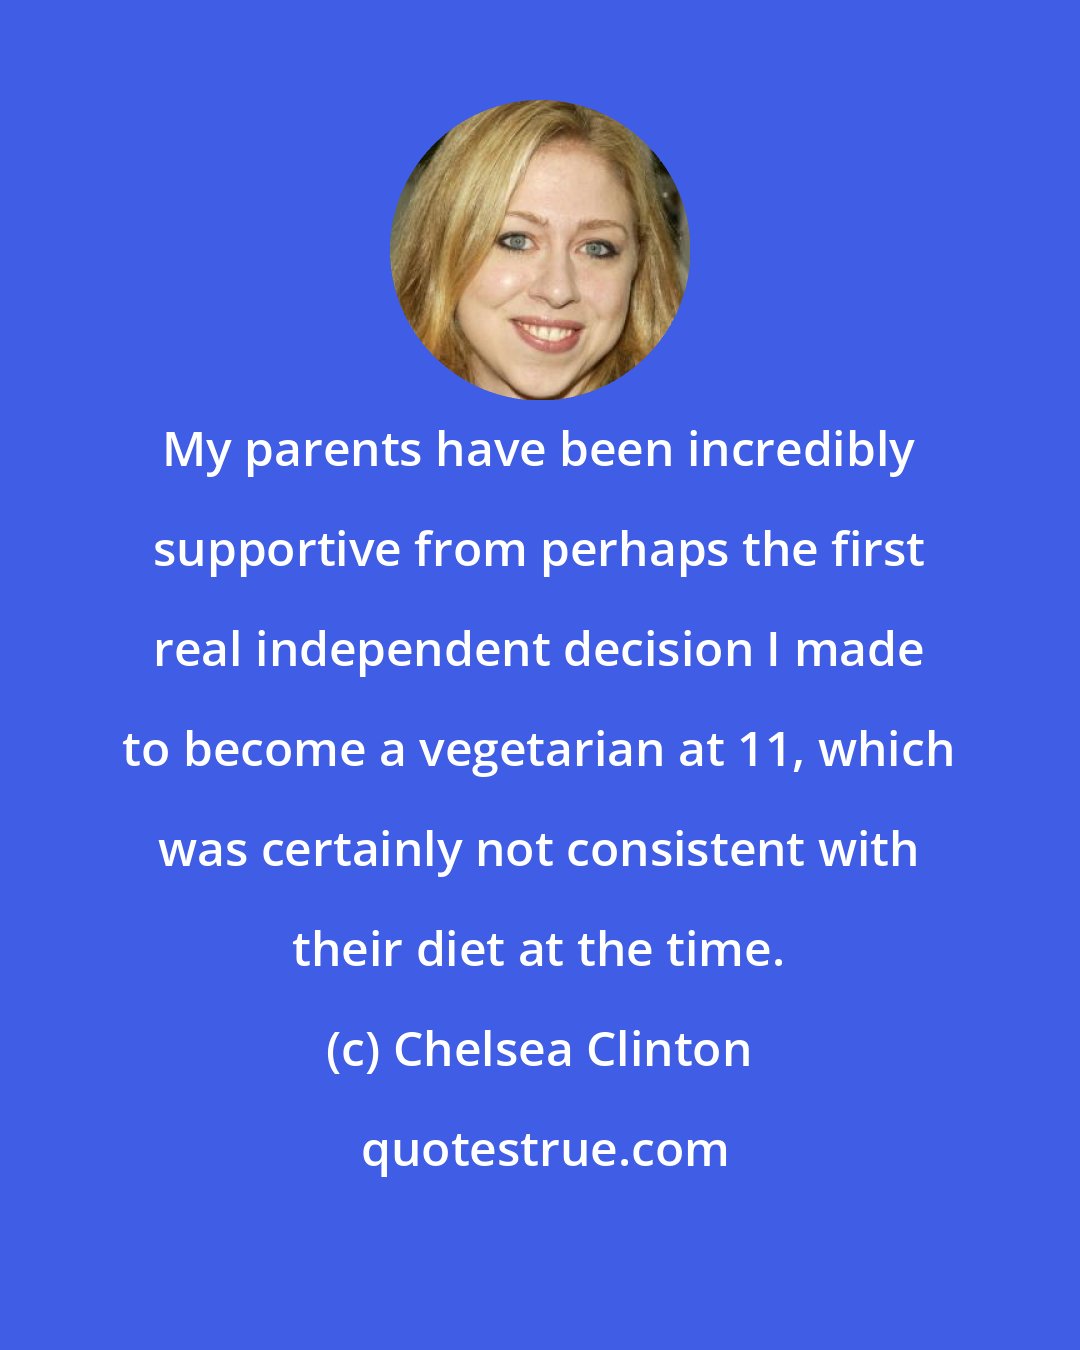 Chelsea Clinton: My parents have been incredibly supportive from perhaps the first real independent decision I made to become a vegetarian at 11, which was certainly not consistent with their diet at the time.